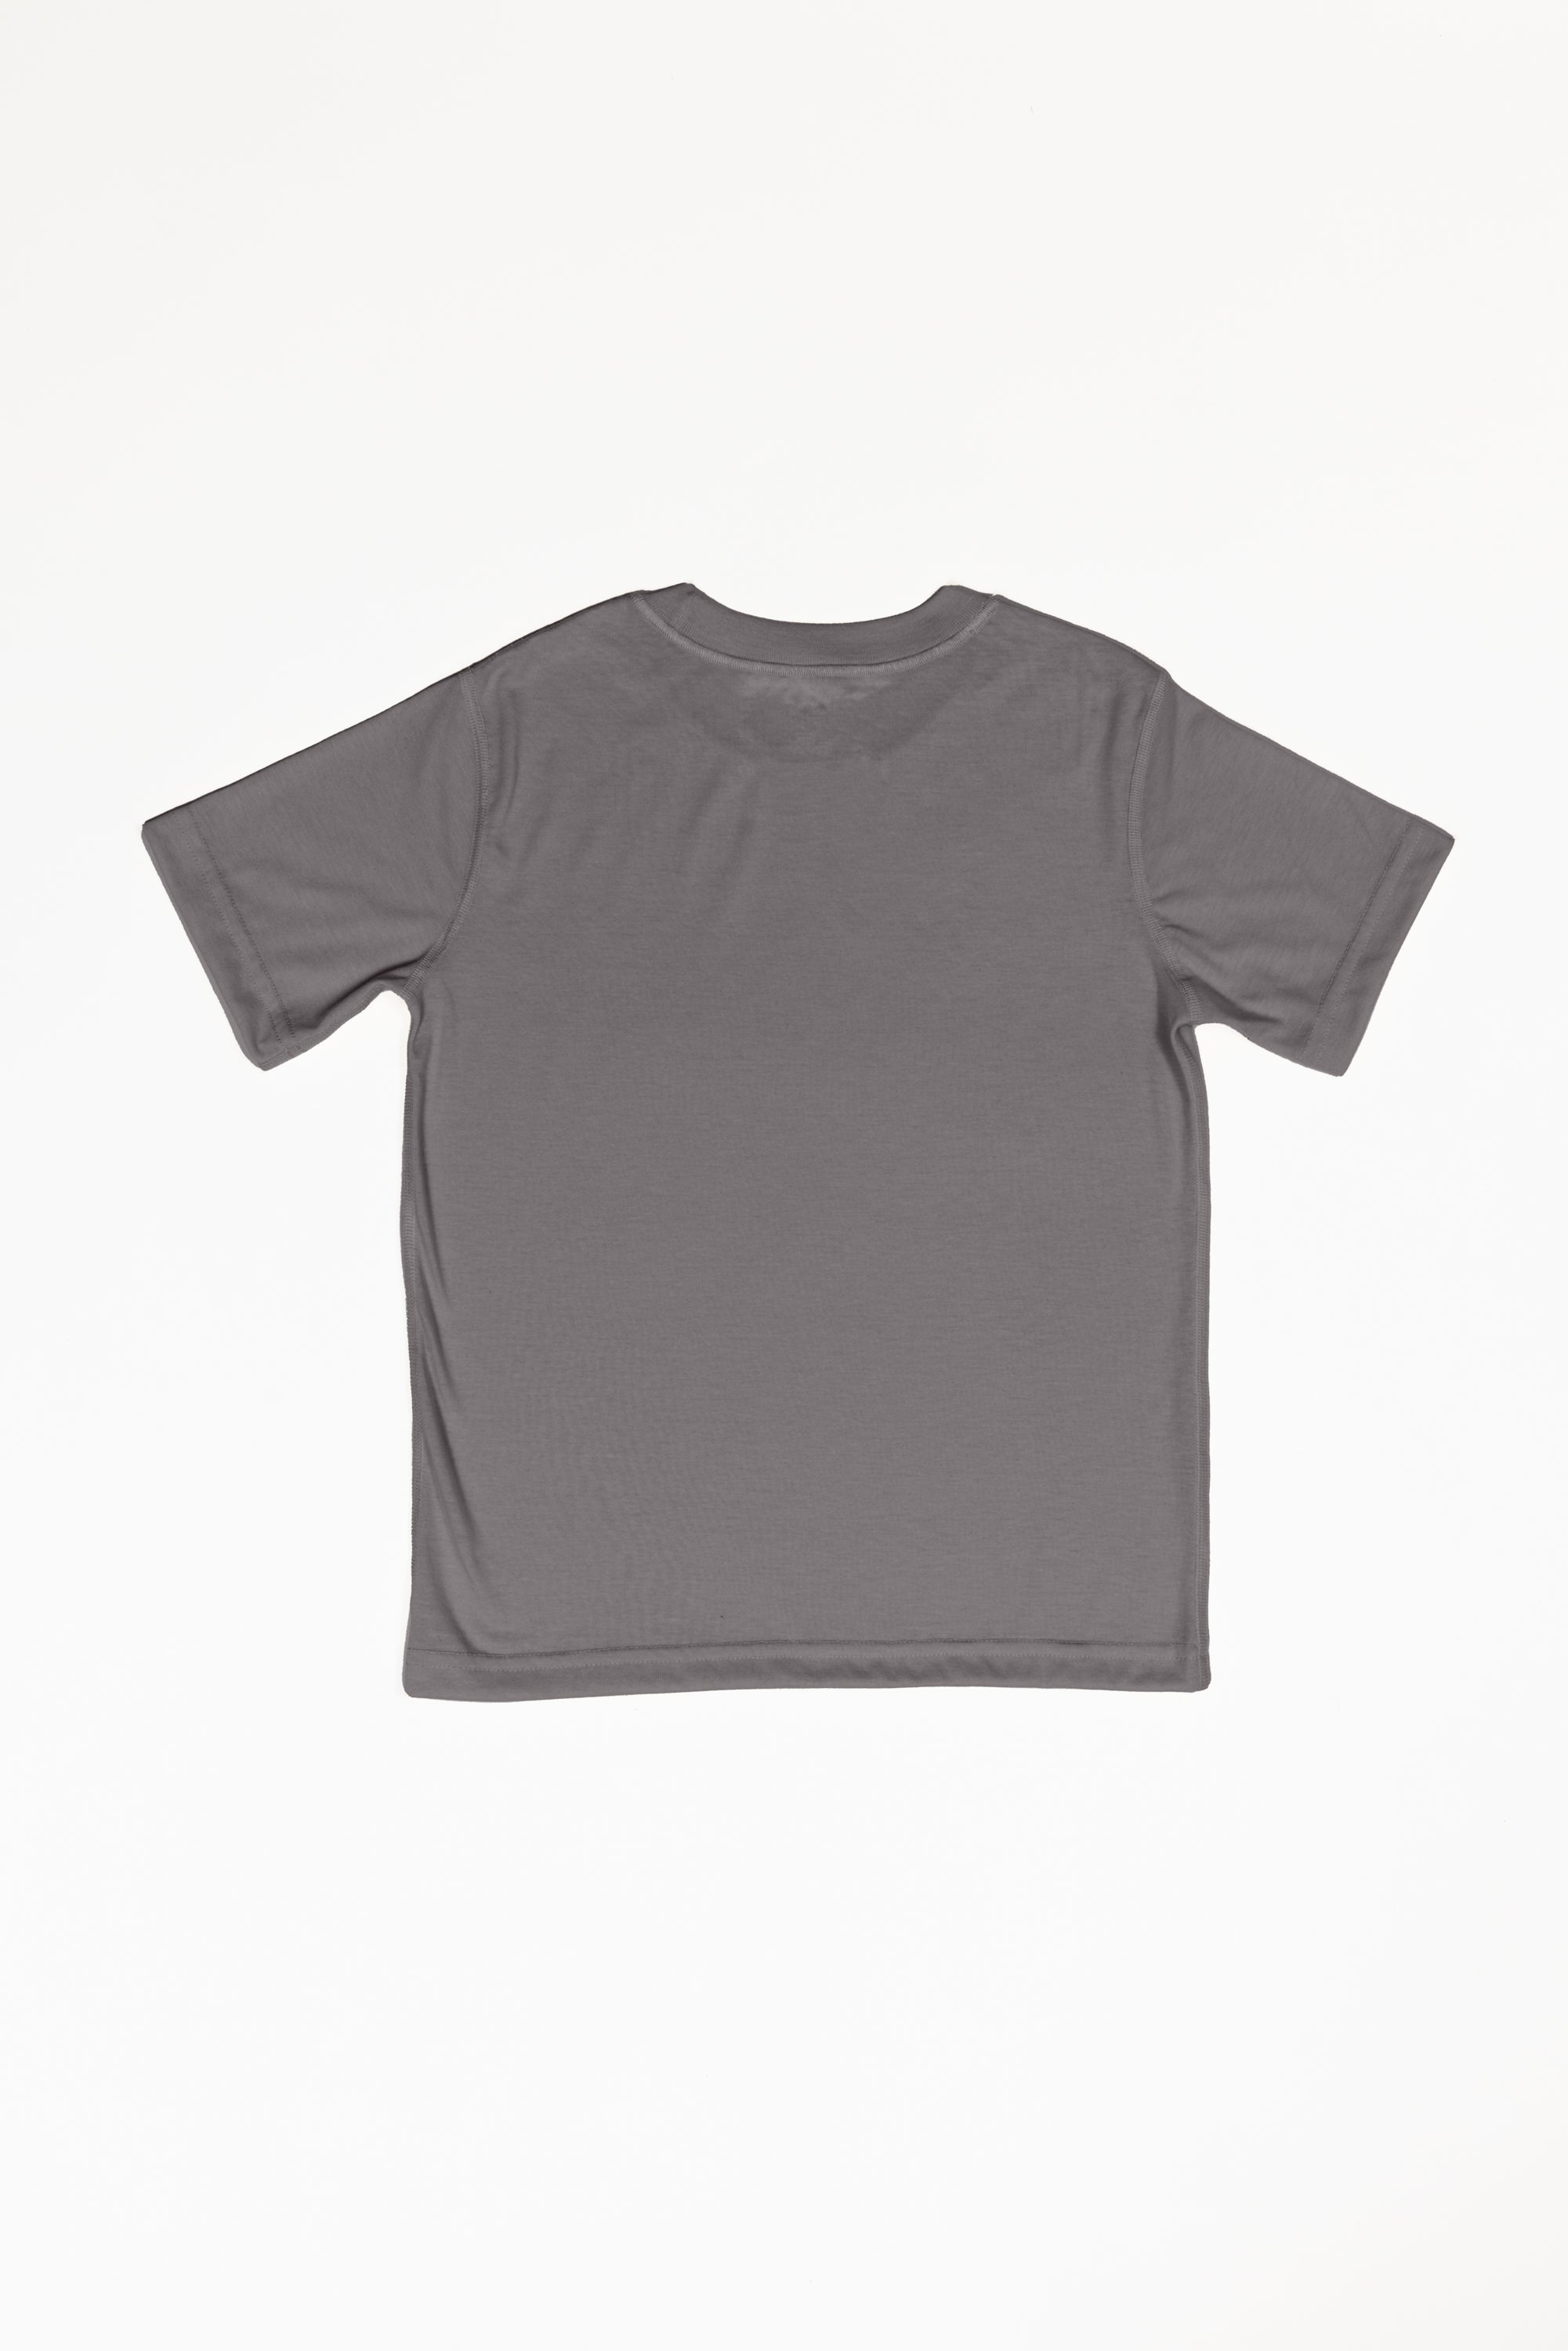 The back of a charcoal grey small t-shirt with a white background. It is a basic t-shirt with a crew neck.